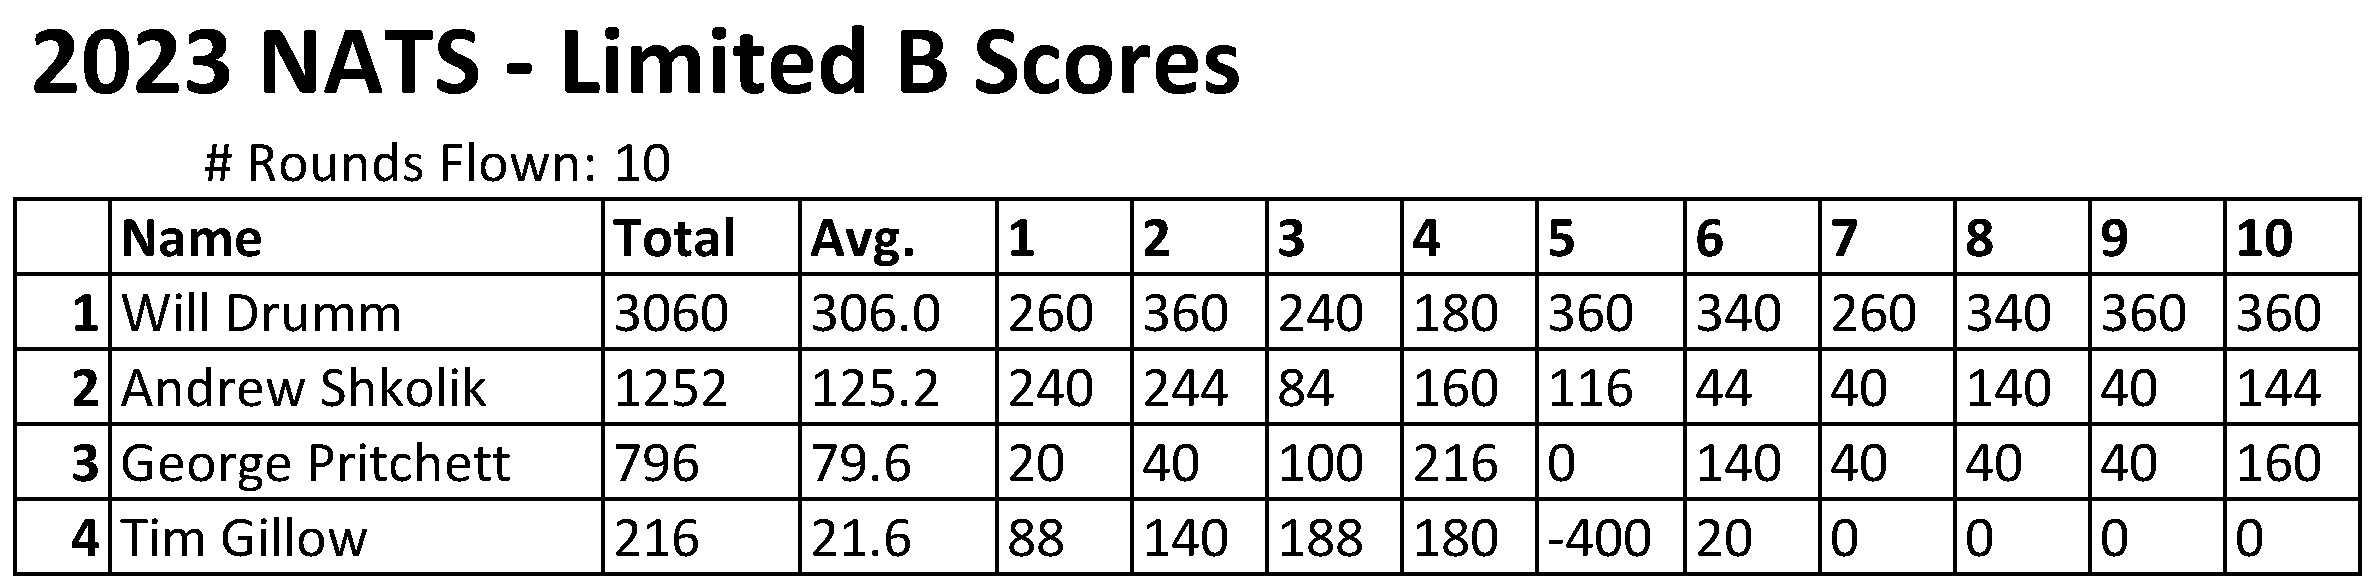 4.	2023 Nats Limited B final scores.